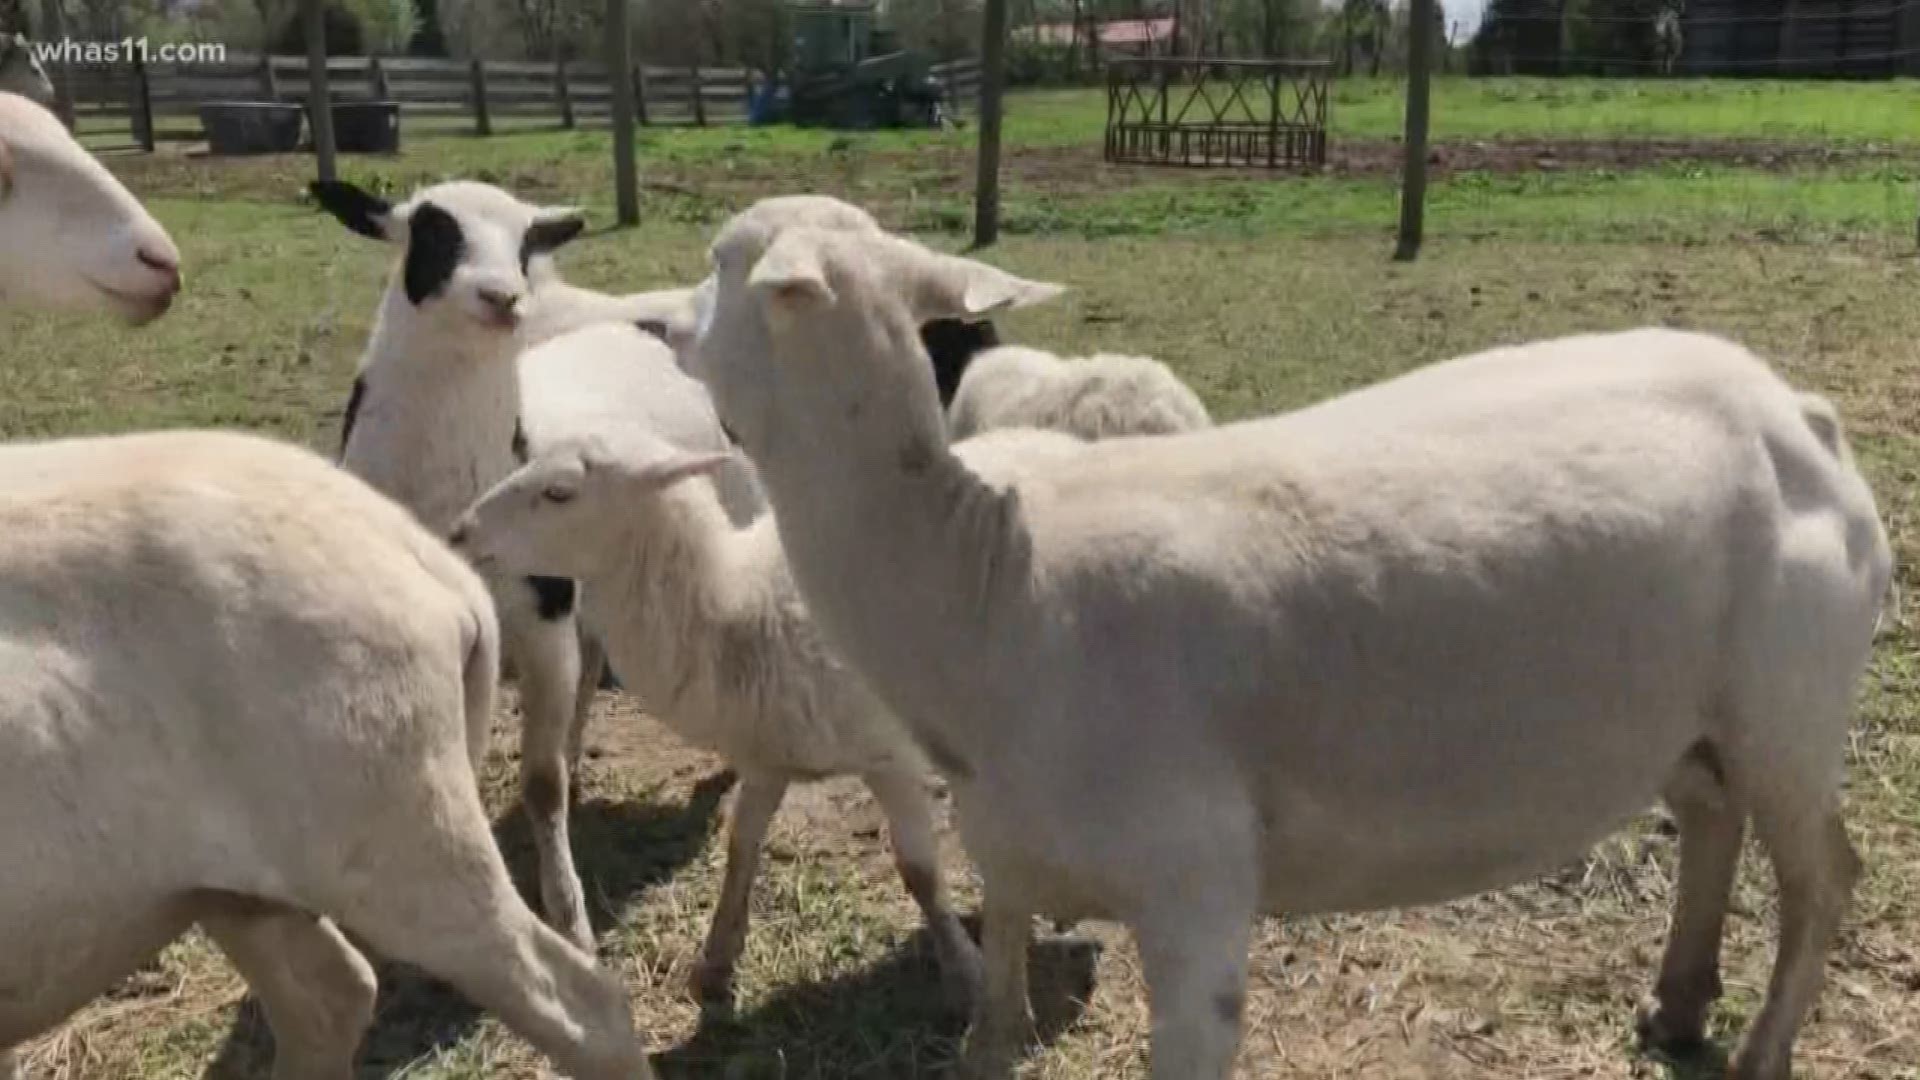 Five sheep killed, another put down and seven missing on a family's property in Louisville. With 13 animals gone the family is looking for answers. Jessie Cohen speaks to the family about the gruesome discovery.